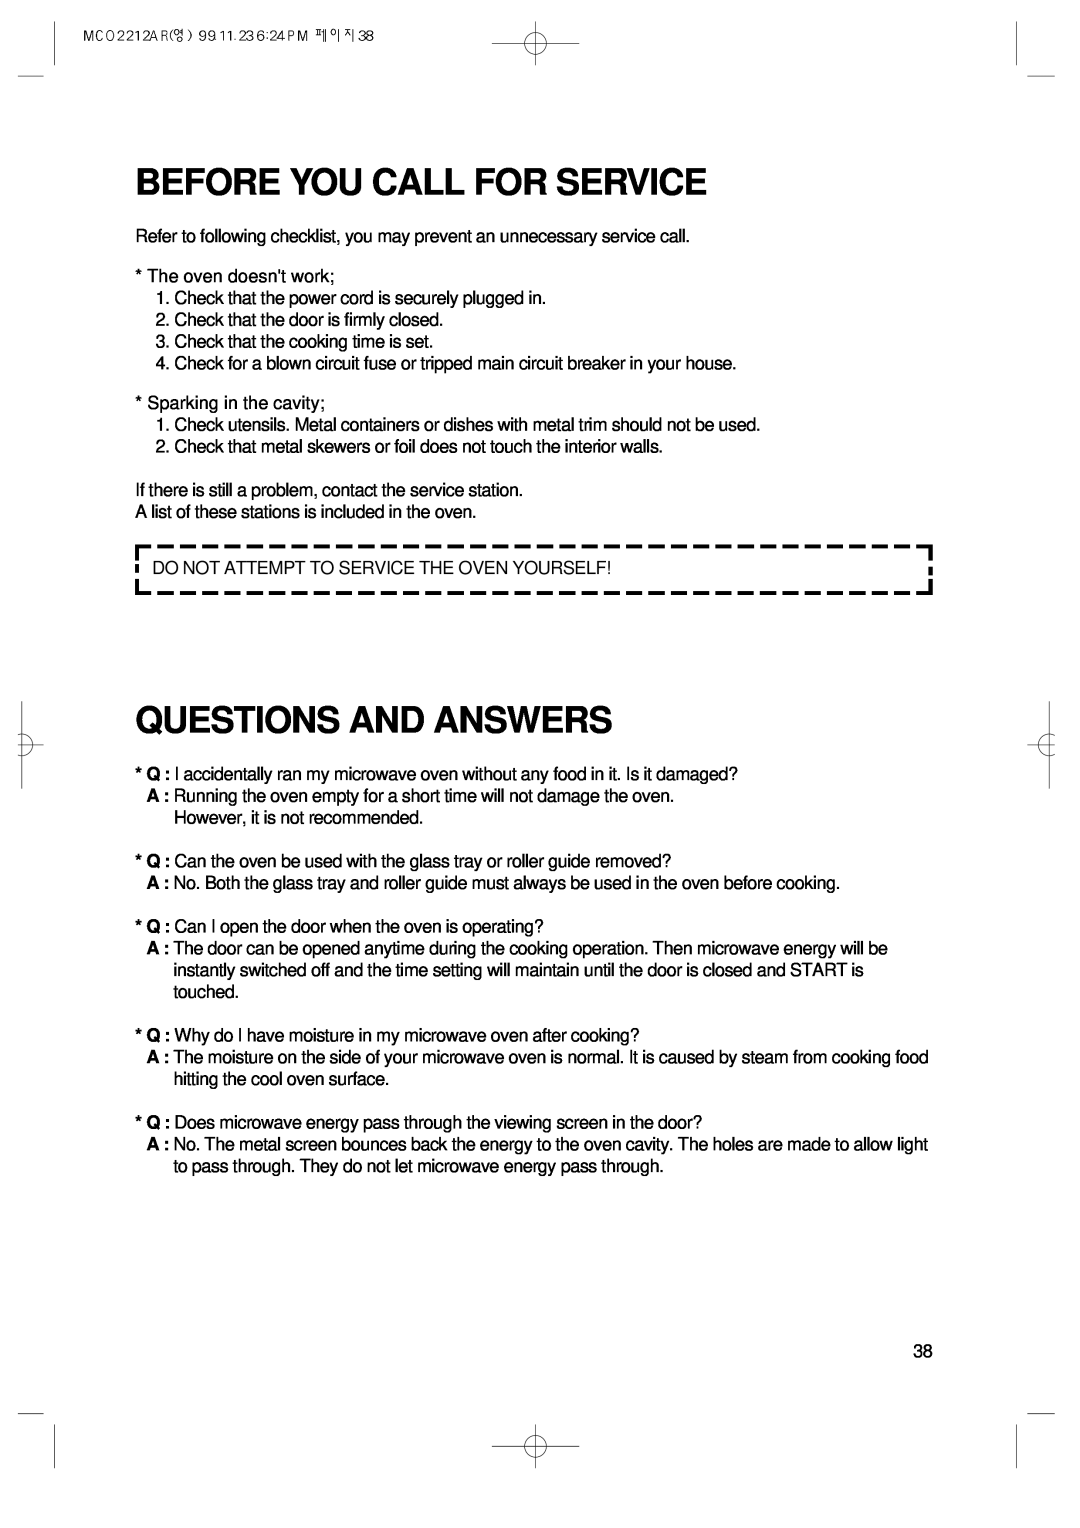 Magic Chef MCO2212AR manual Before You Call For Service, Questions And Answers 